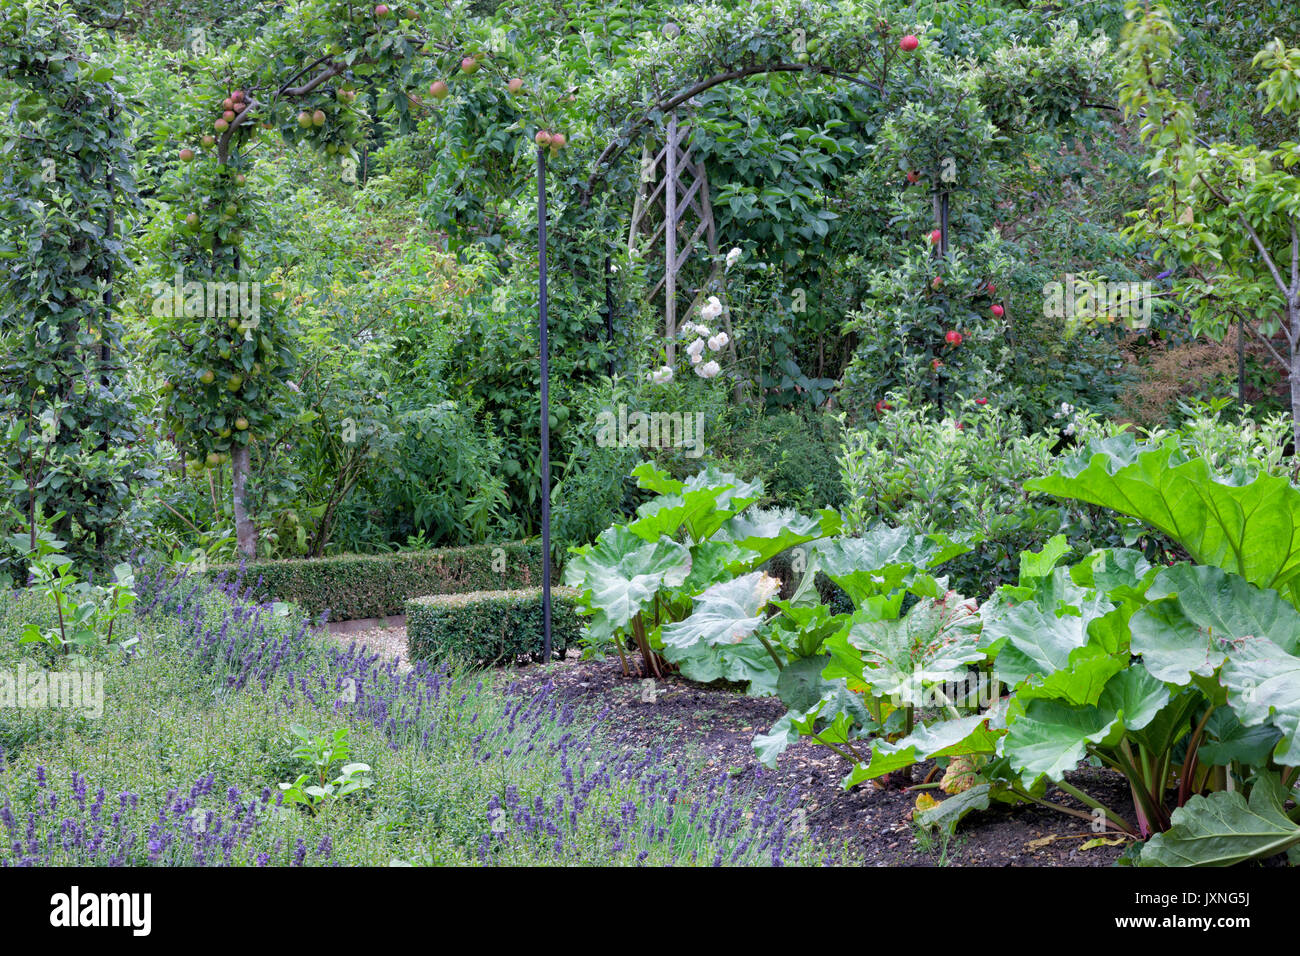 Vegetable and fruit garden with red, green apples on pergola, rhubarb growing in front of purple lavender . Stock Photo